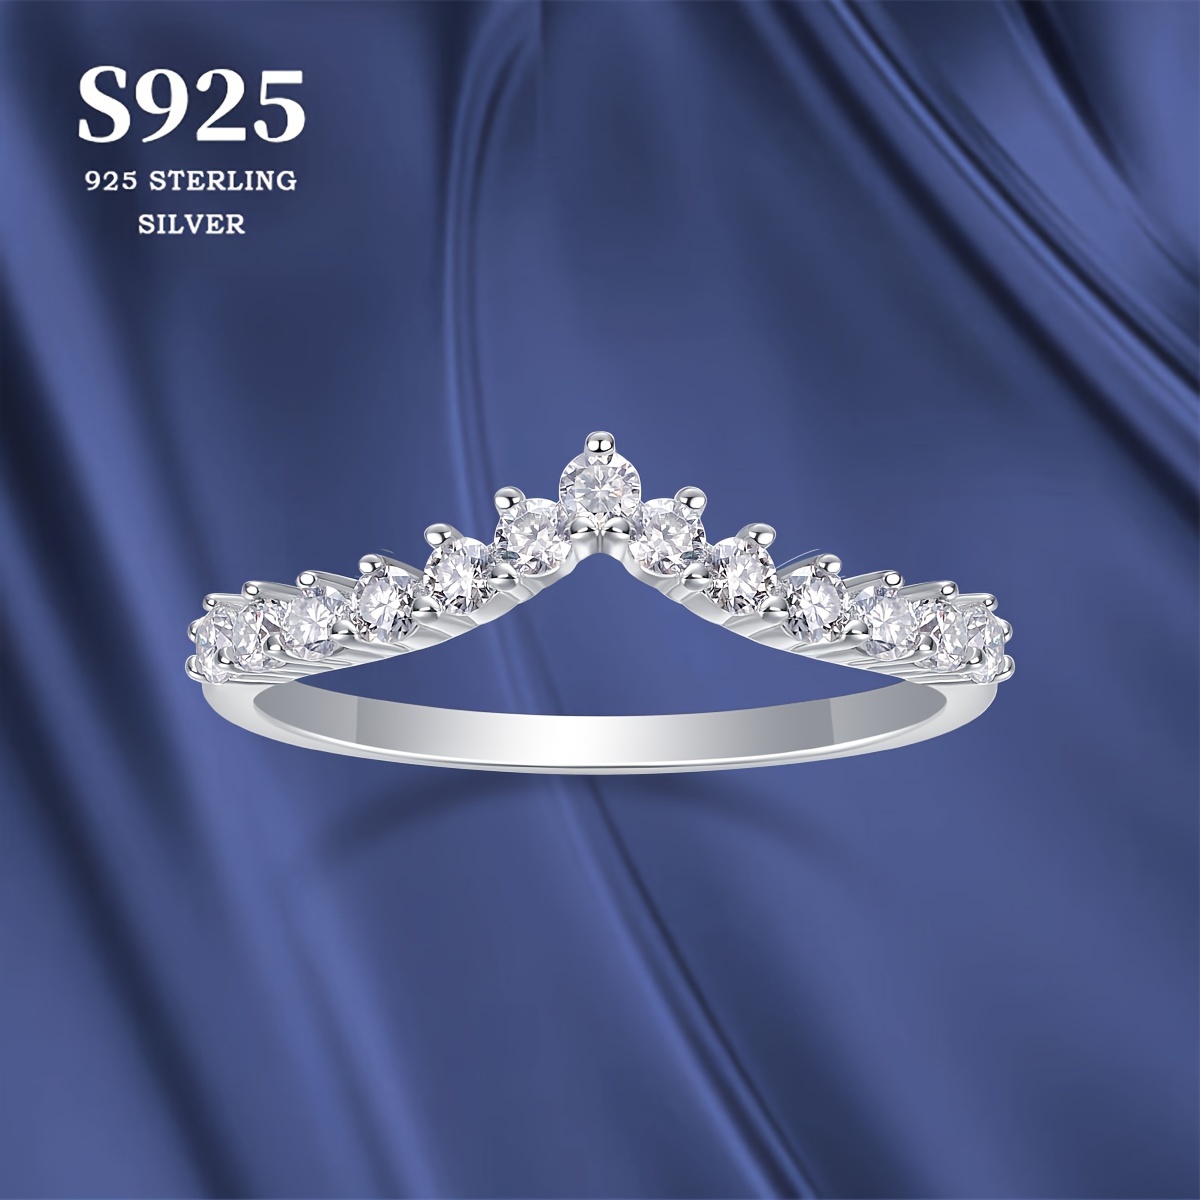 

1pc Princess Crown Ring Set With Moissanite S925 Silver Plated Daily Activity Jewelry For Men And Women As A Gift For Family And Friends To Wear